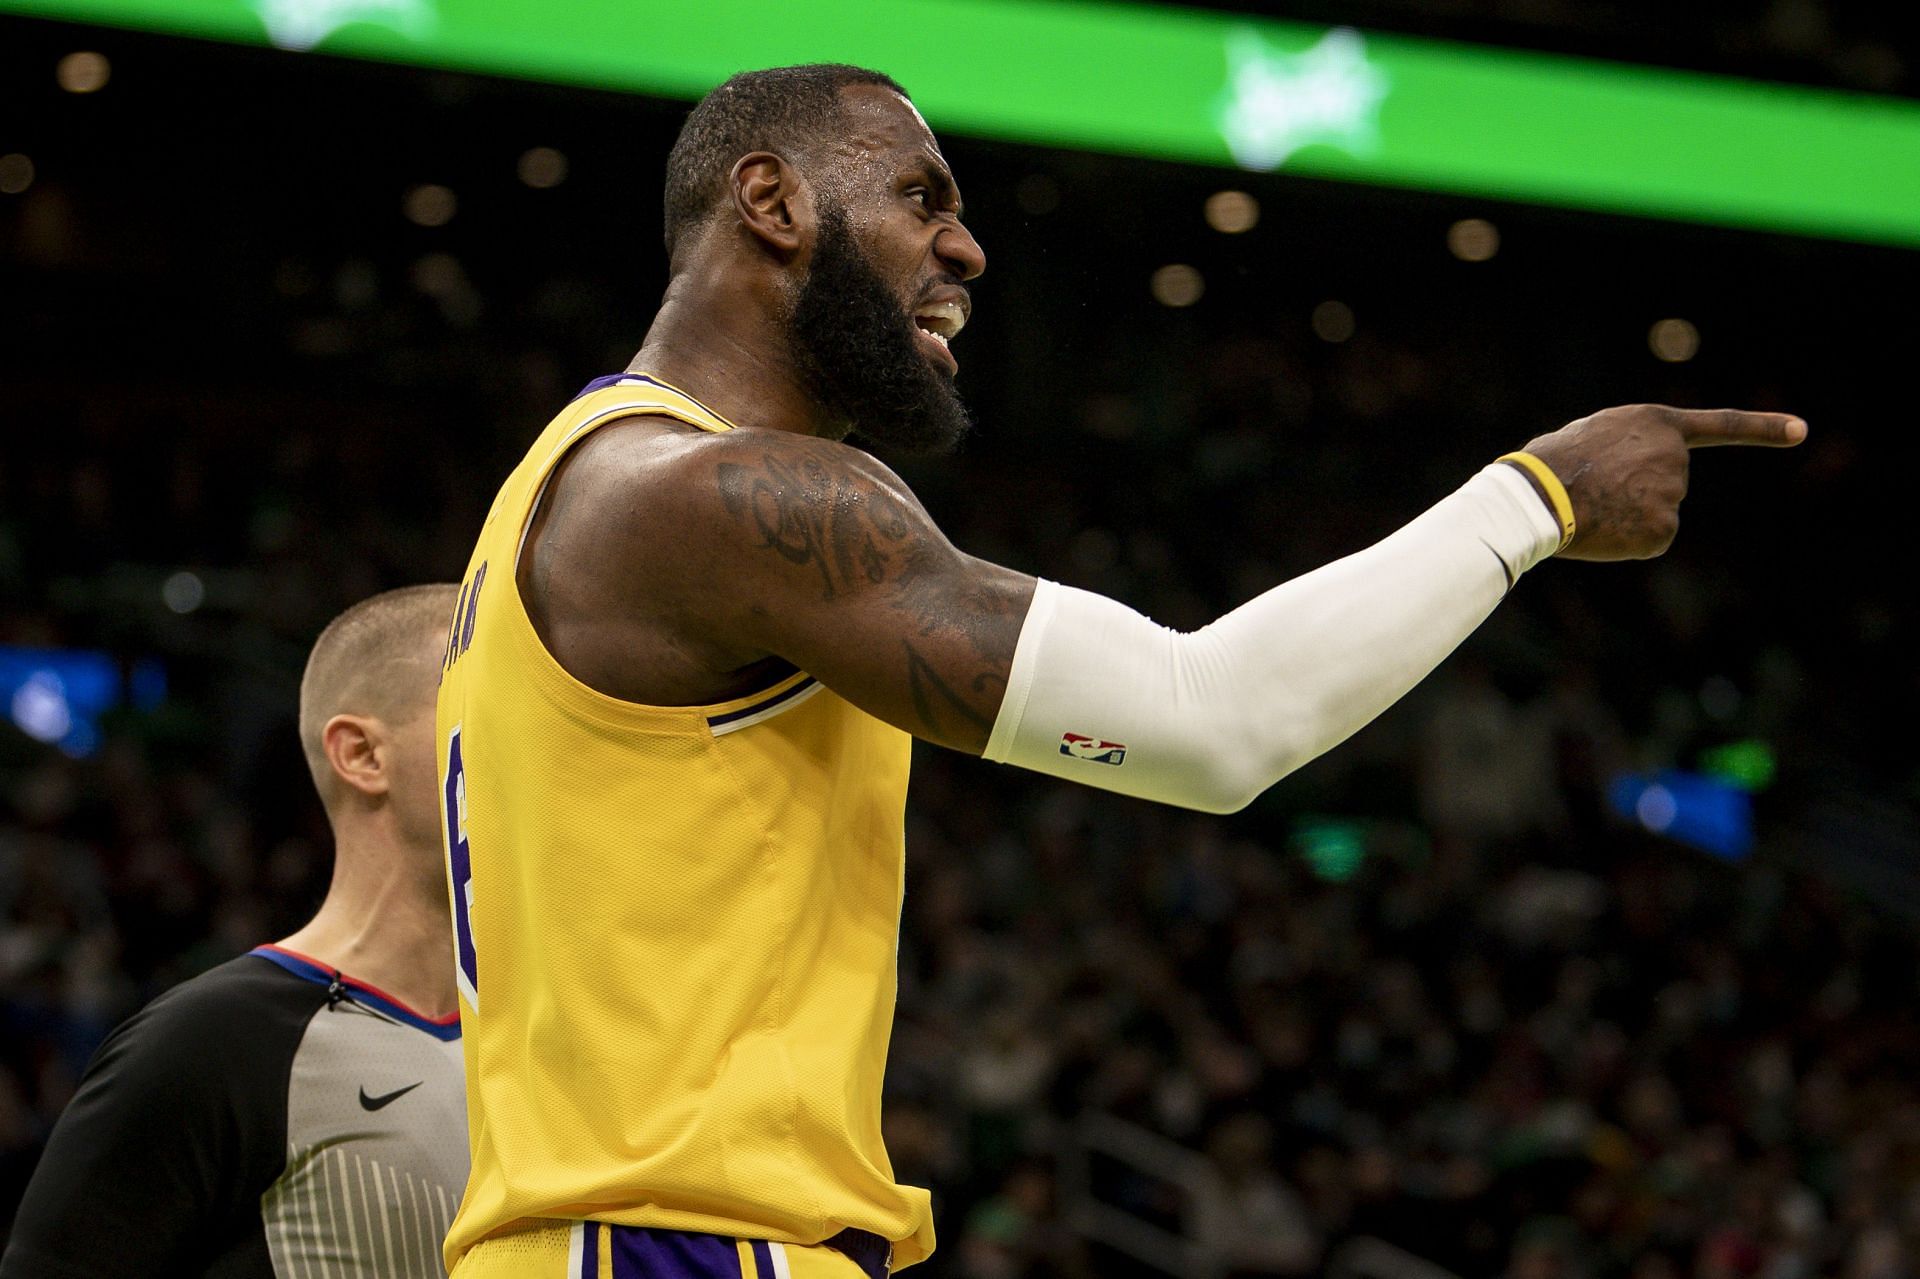 LeBron James says the LA Lakers need to play with a sense of urgency each time they take the floor